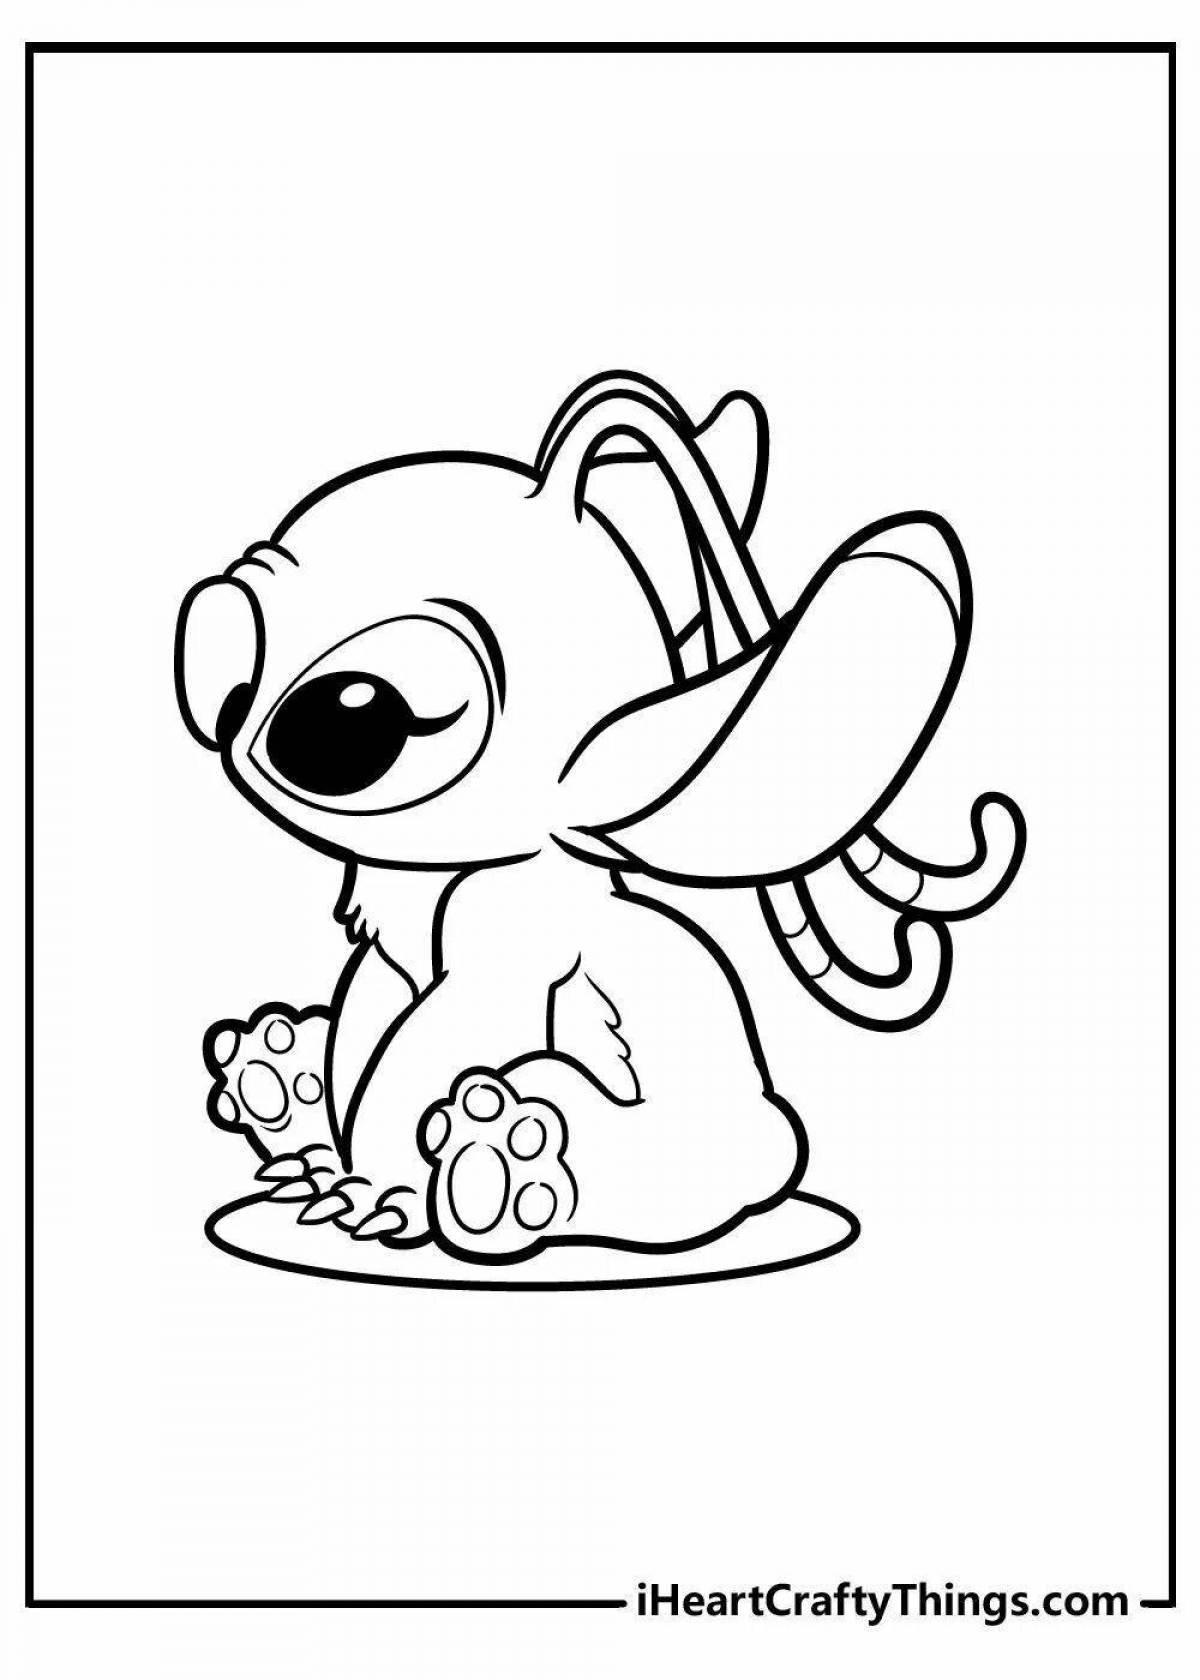 Charming stitch and angel coloring page